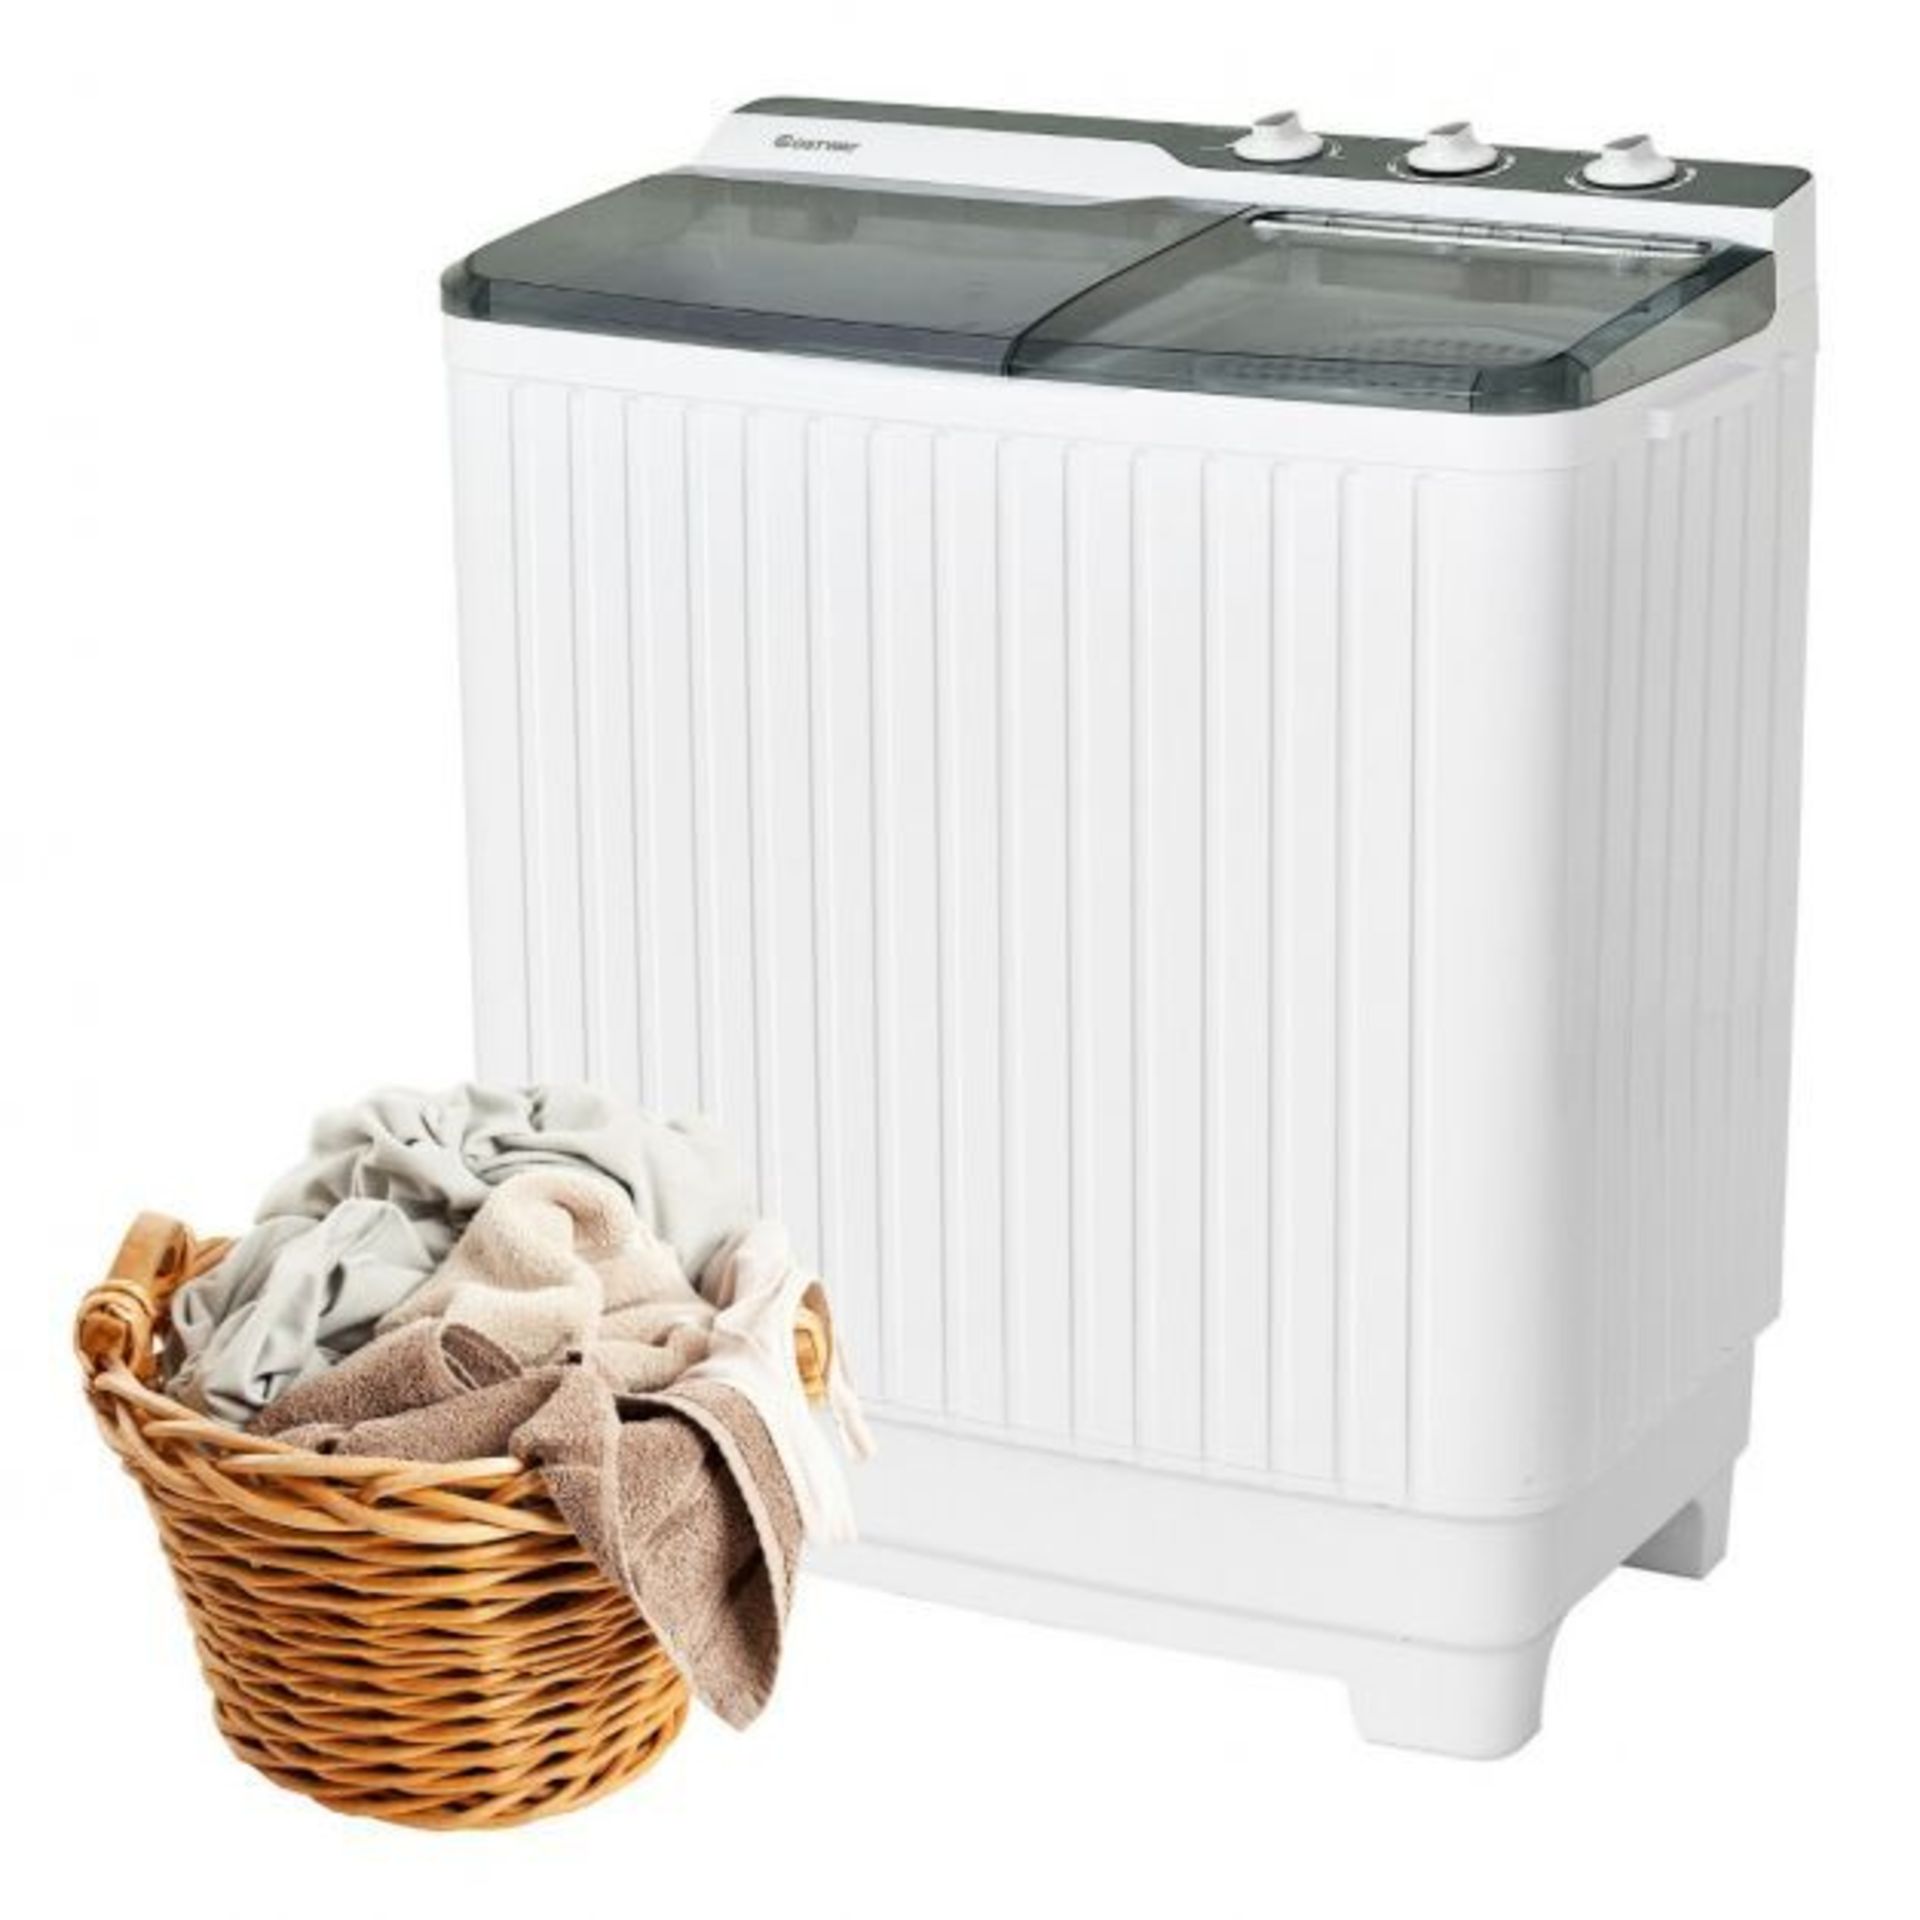 Portable Washer and Spin Dryer Combo with Timer Control. - ER53. Featuring a twin tub washing